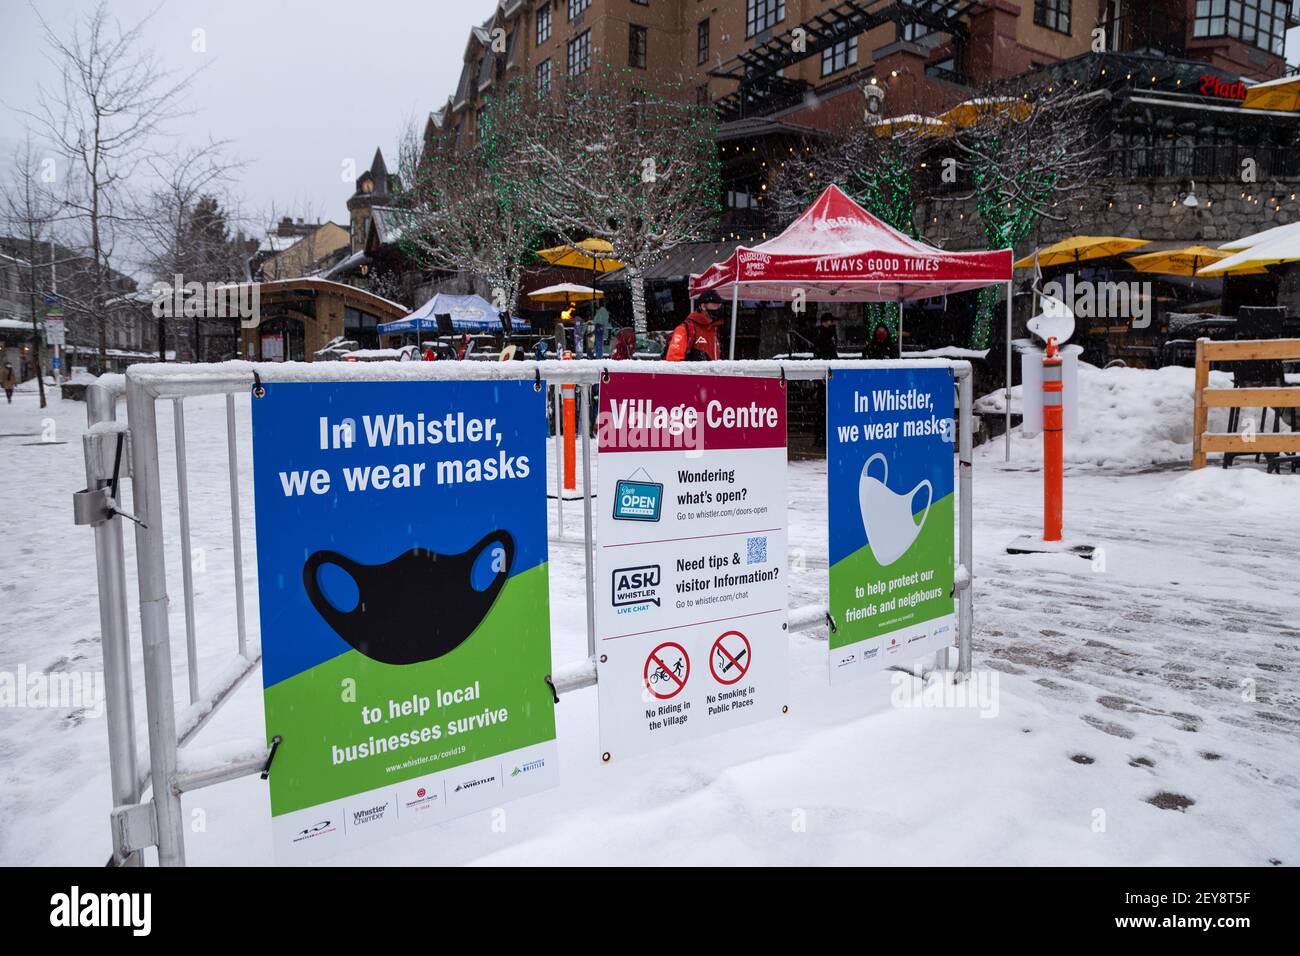 WHISTLER, BC, CANADA - FEB 28, 2021: Covid 19 health advisory signs in Whistler Village. Stock Photo